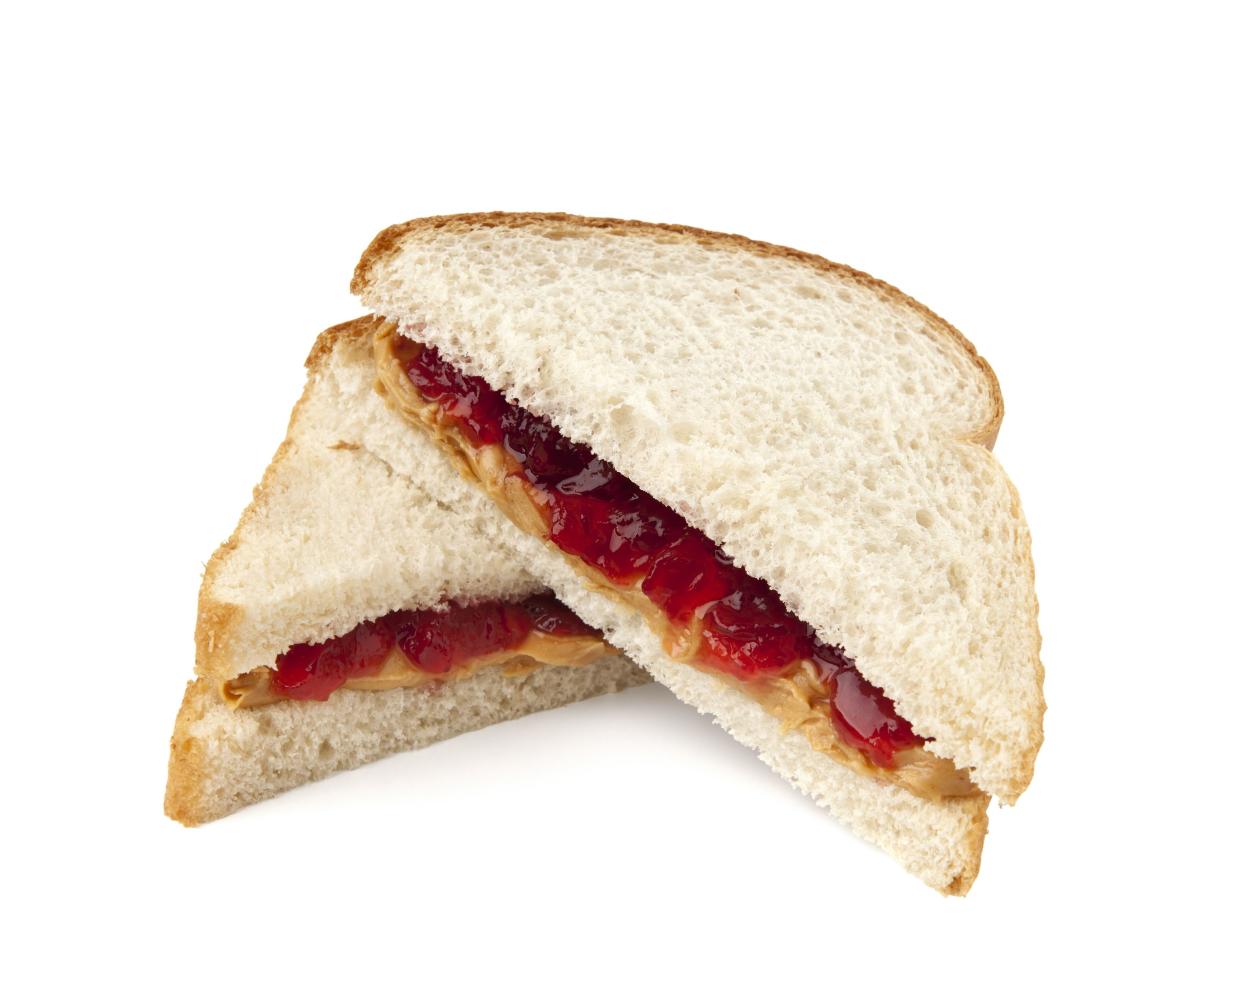 Peanut butter and jelly sandwich with clipping path on white background.  Please see my portfolio for other food and drink images.